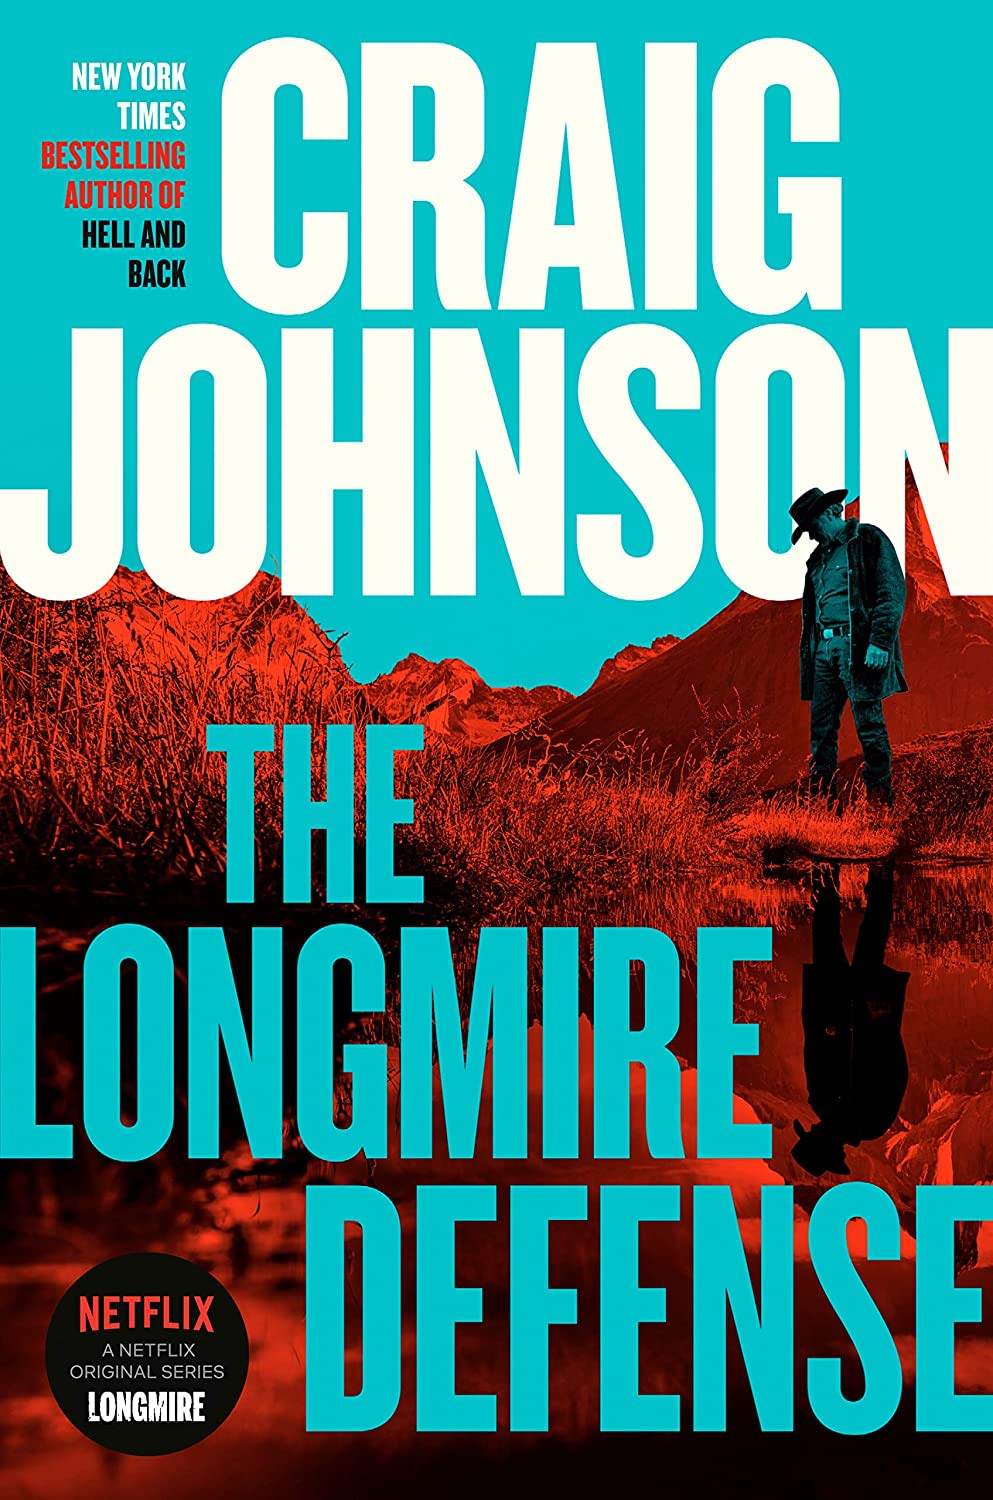 Walt Longmire character returns to his youth in 19th novel